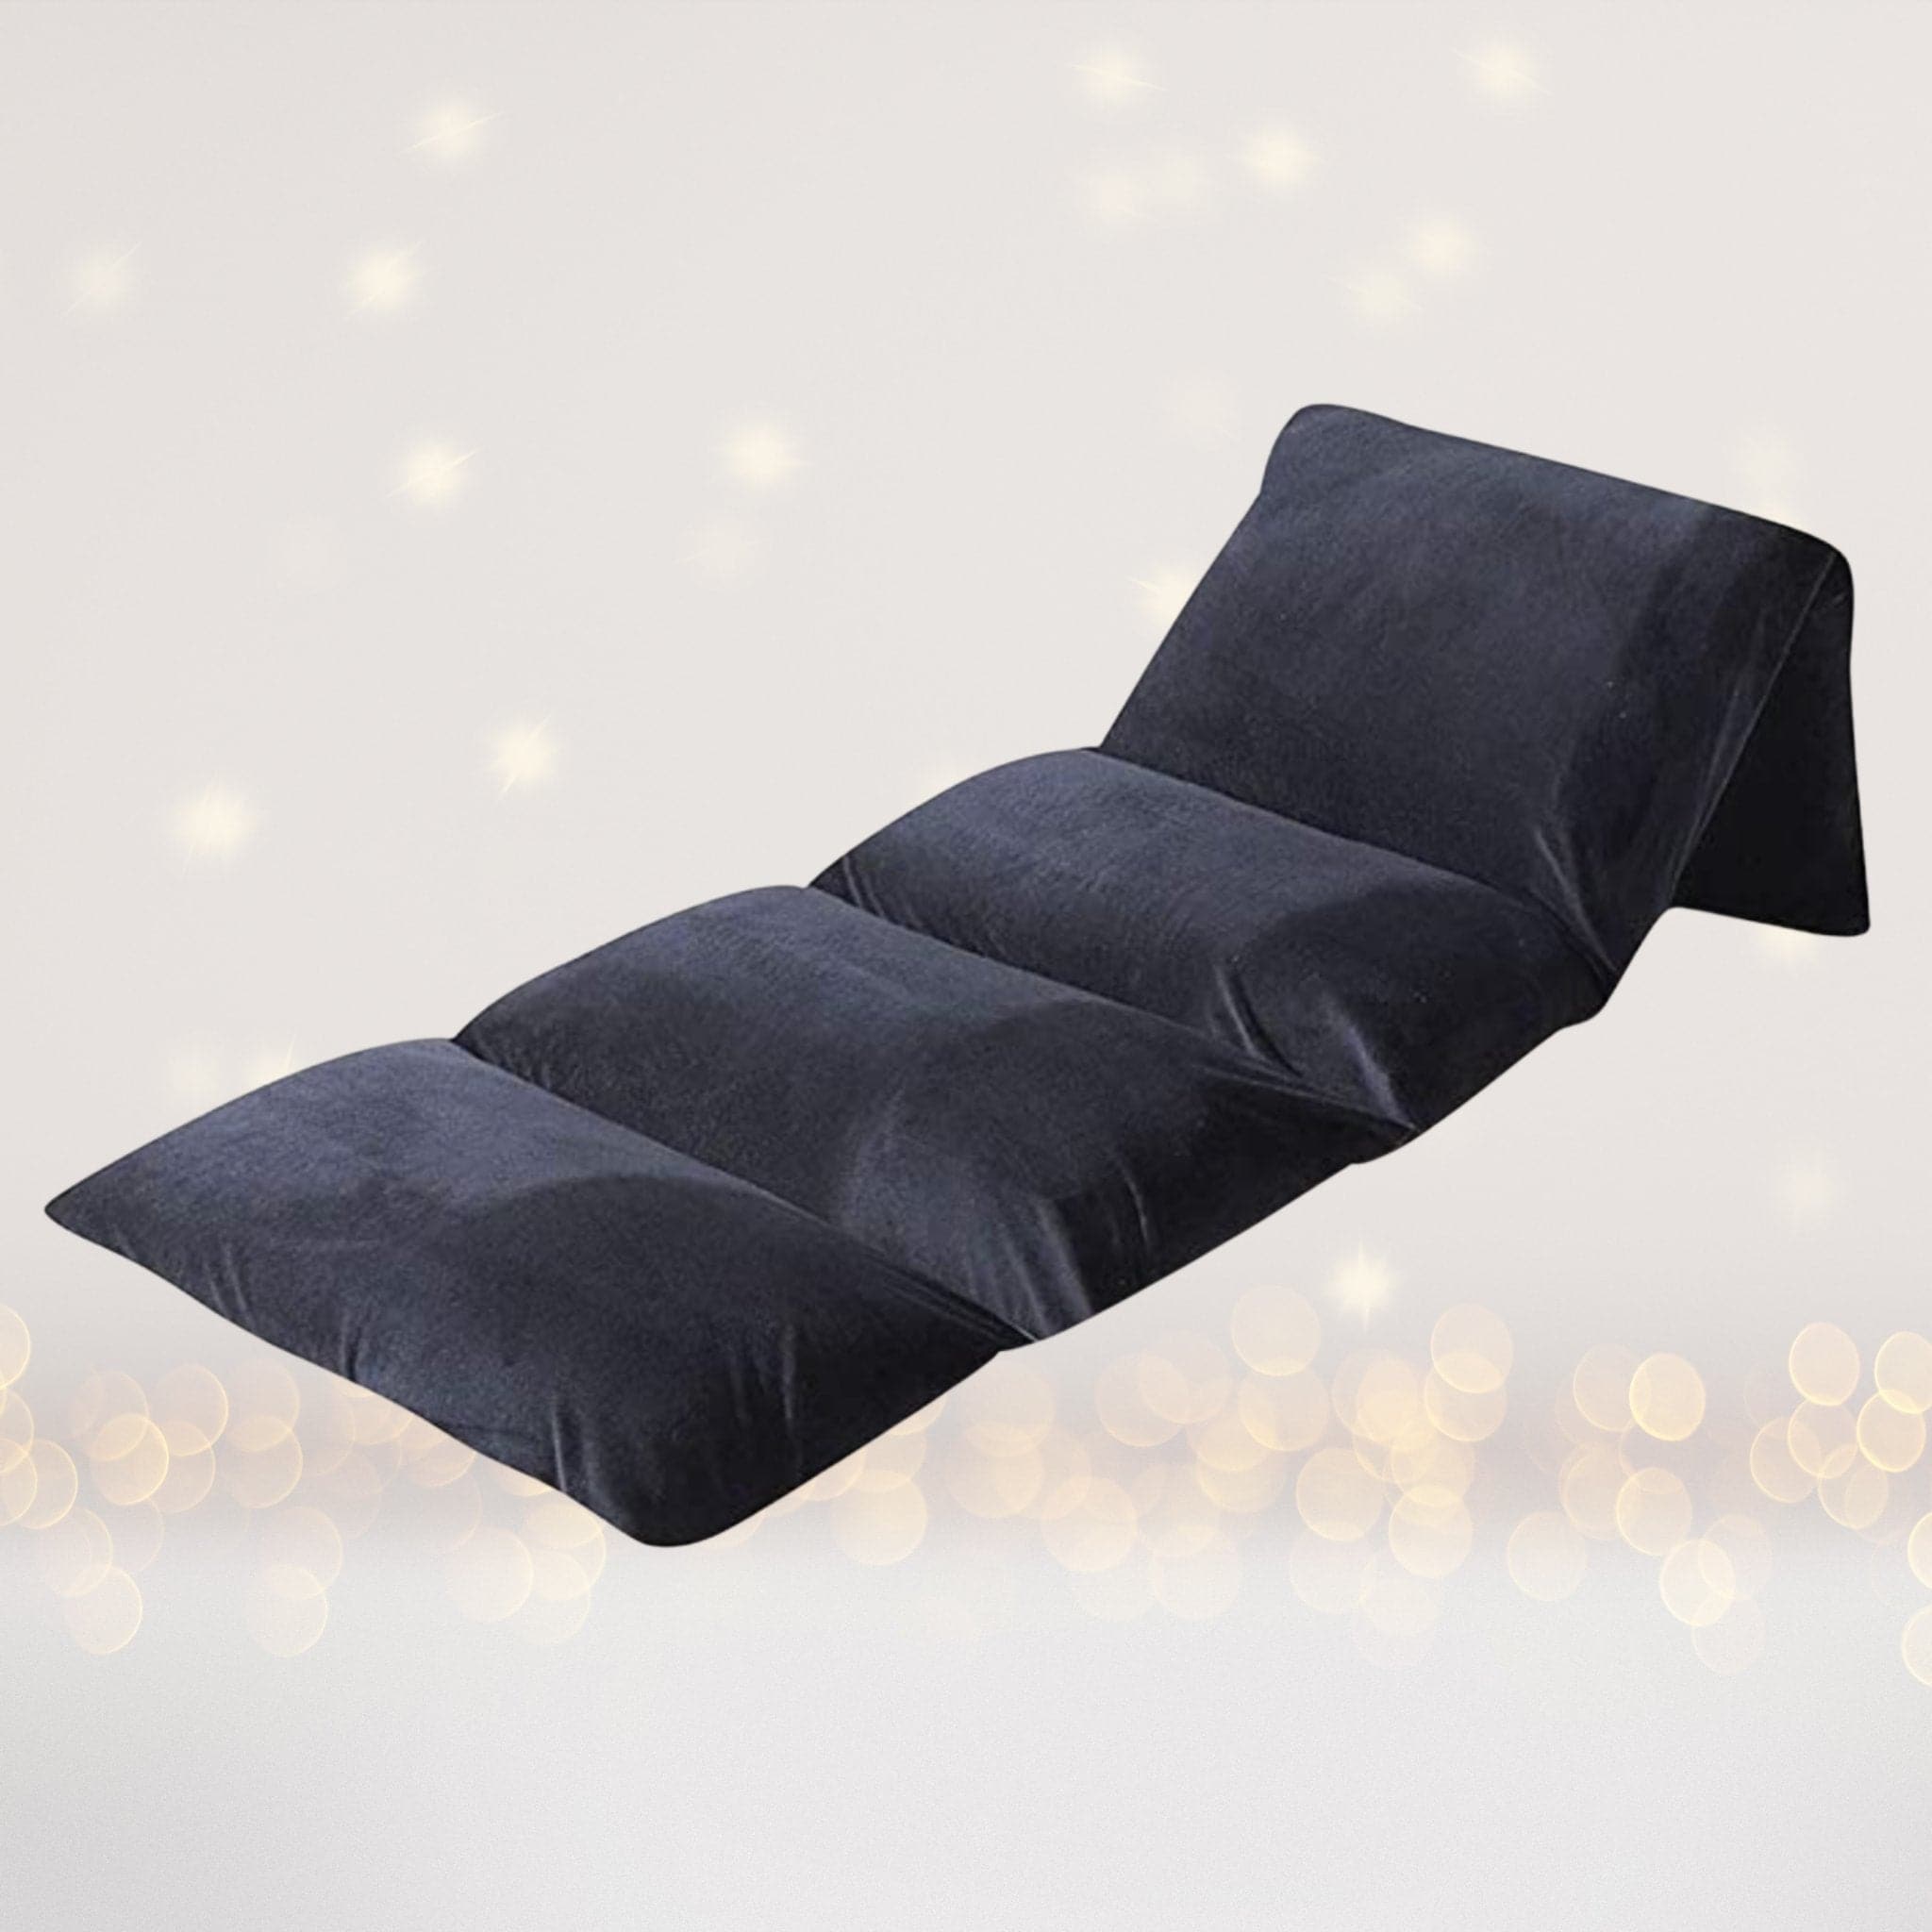 https://www.chickychickyblingbling.com/cdn/shop/products/solid-black-pillow-bed-case-pillow-bed-floor-lounger-398206.jpg?v=1674257301